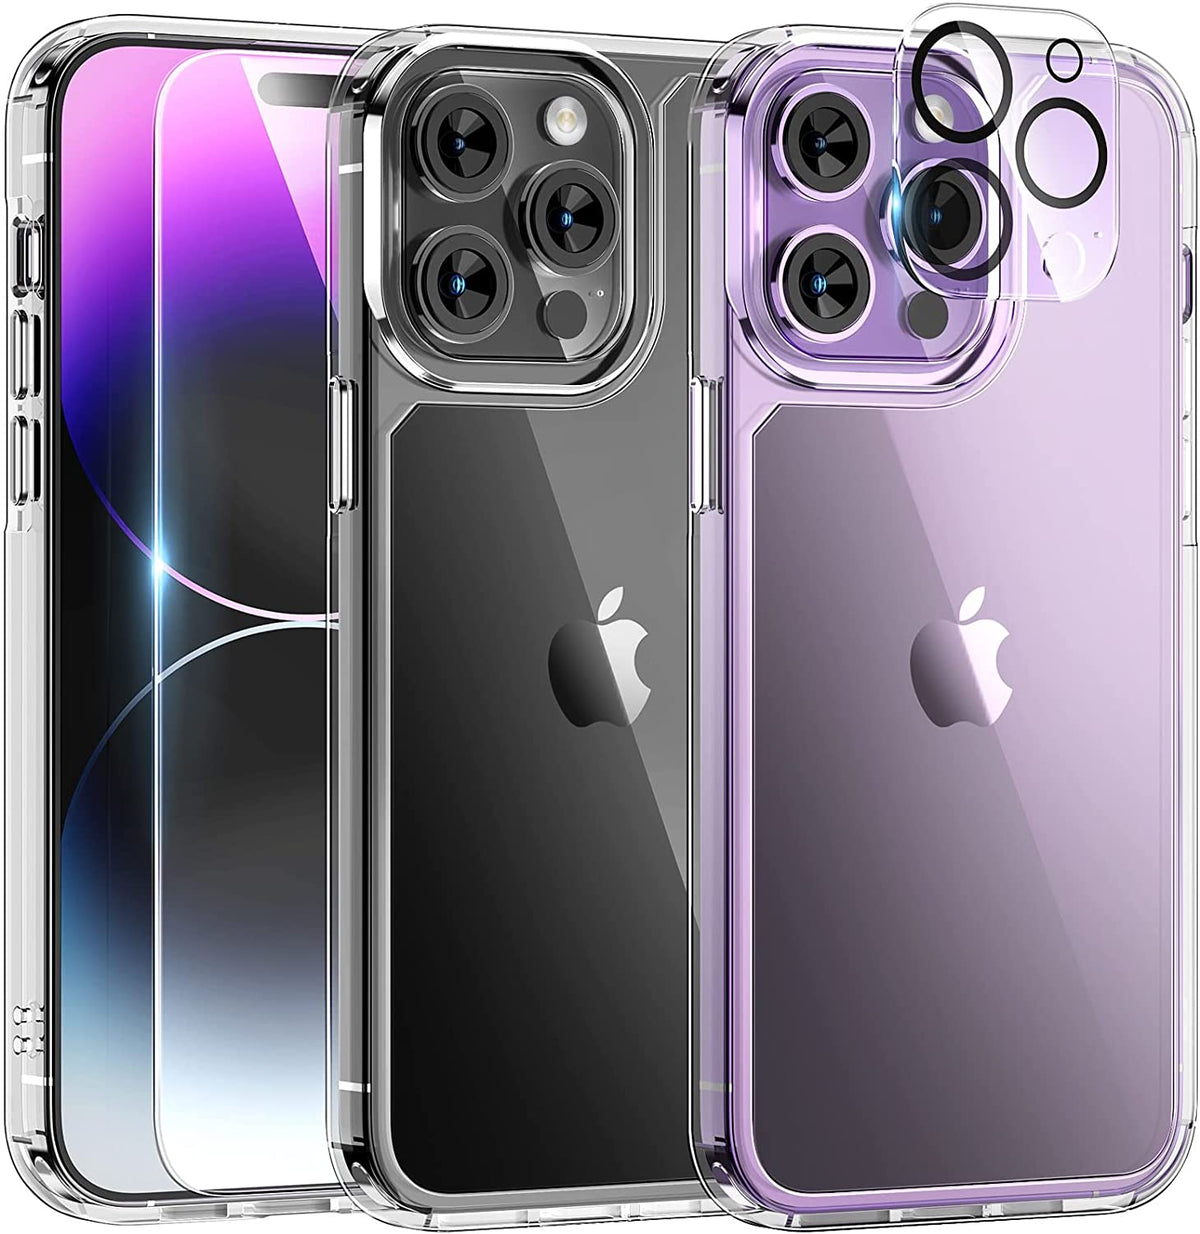 TAURI [5 in 1] for iPhone 14 Pro Max Case [Not Yellowing], with 2 Tempered Glass Screen Protectors + 2 Camera Lens Protectors [Military Grade Protection] Shockproof Slim 14 Pro Max 6.7 Inch, Clear